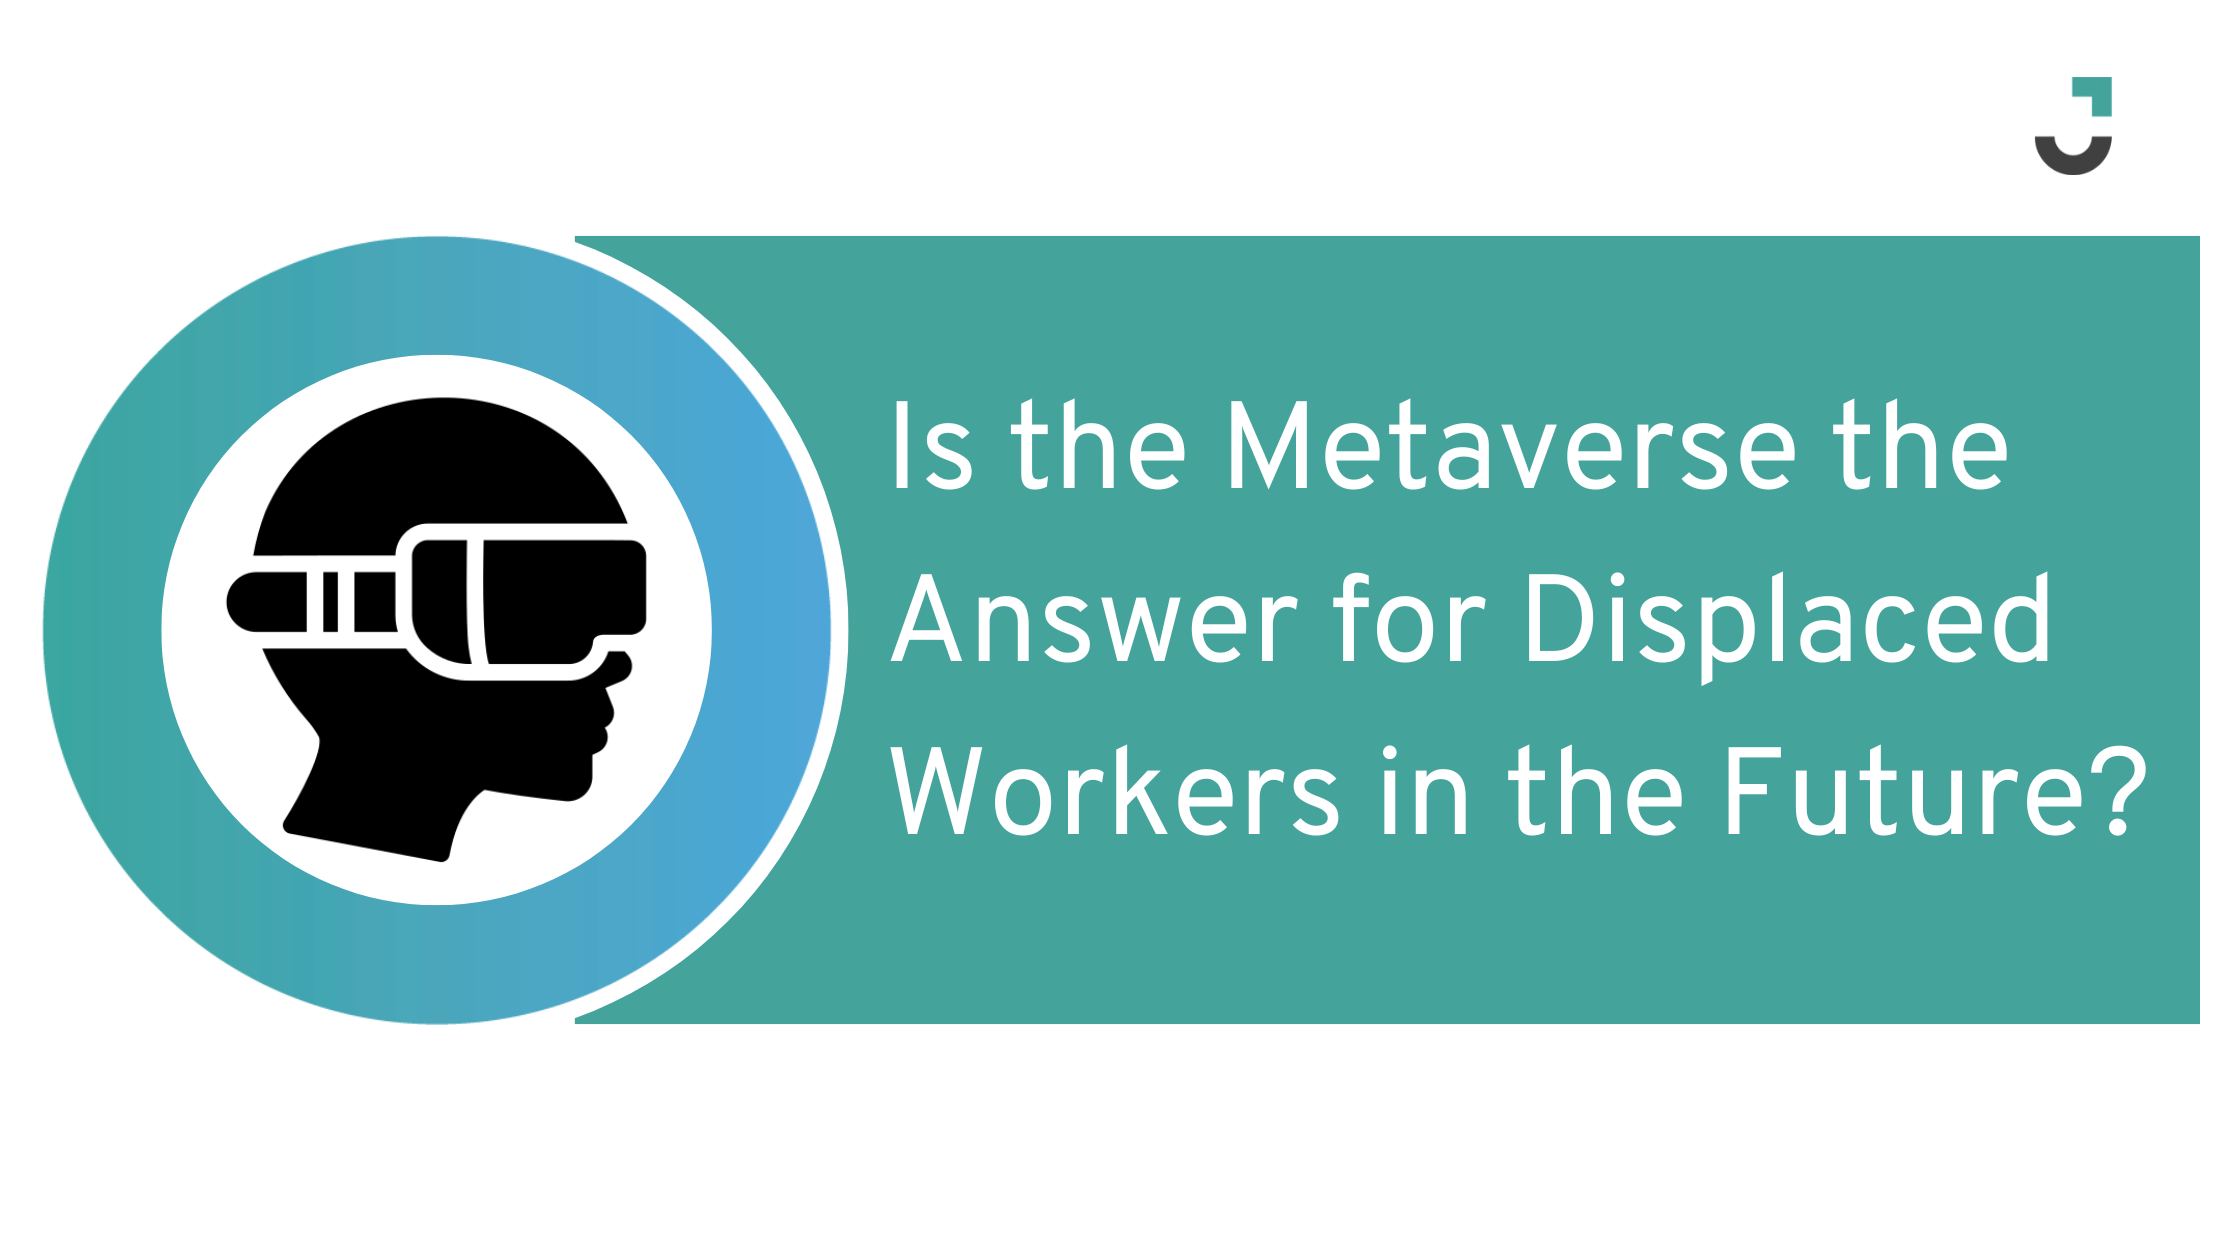 Is the Metaverse the Answer for Displaced Workers in the Future?